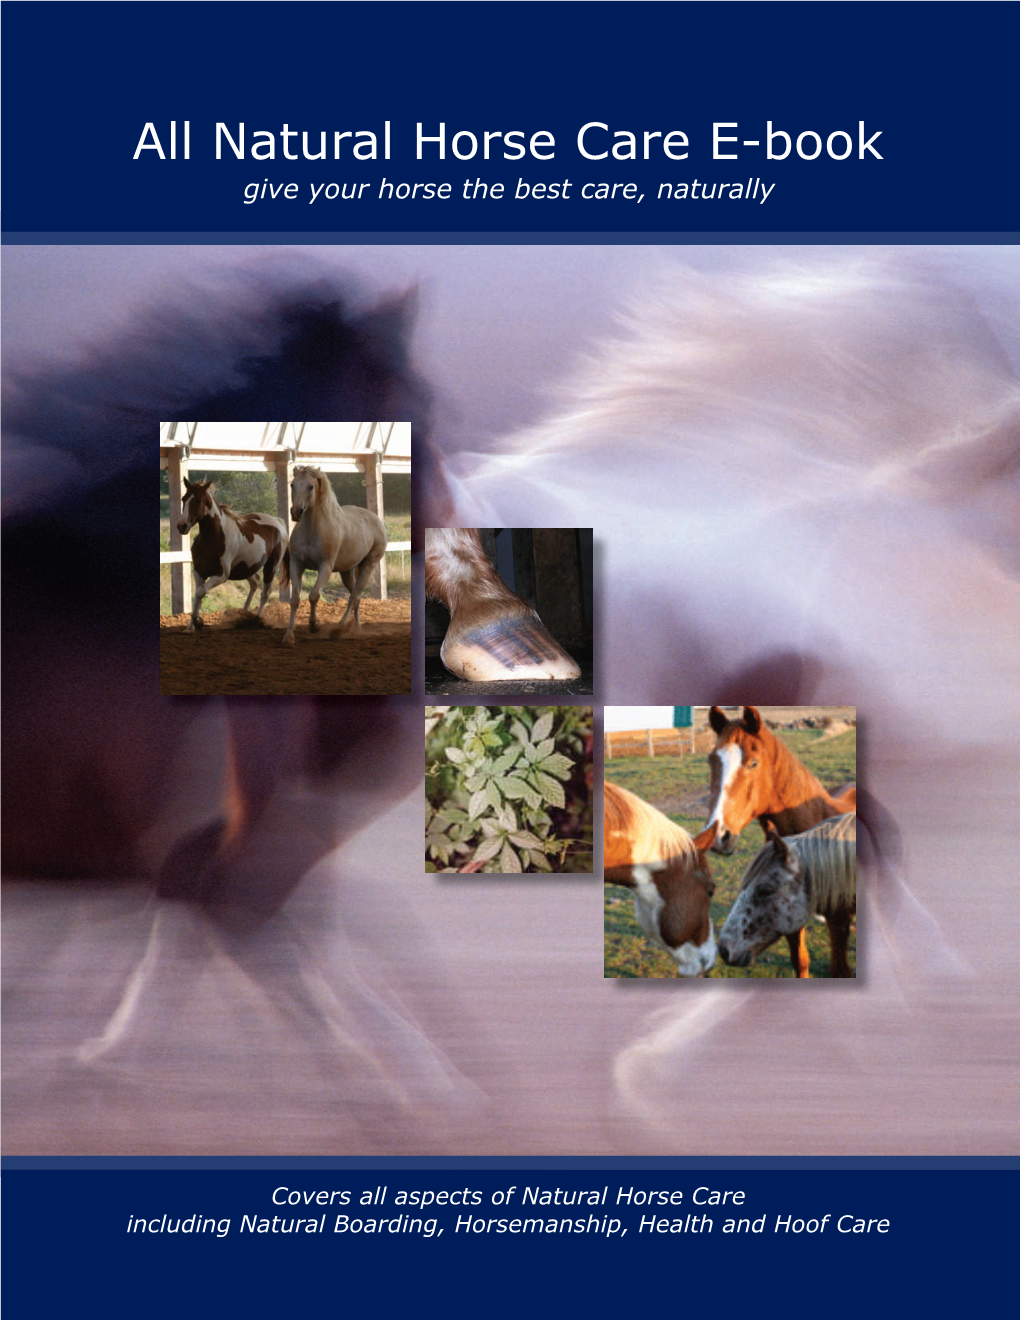 All Natural Horse Care E-Book Give Your Horse the Best Care, Naturally